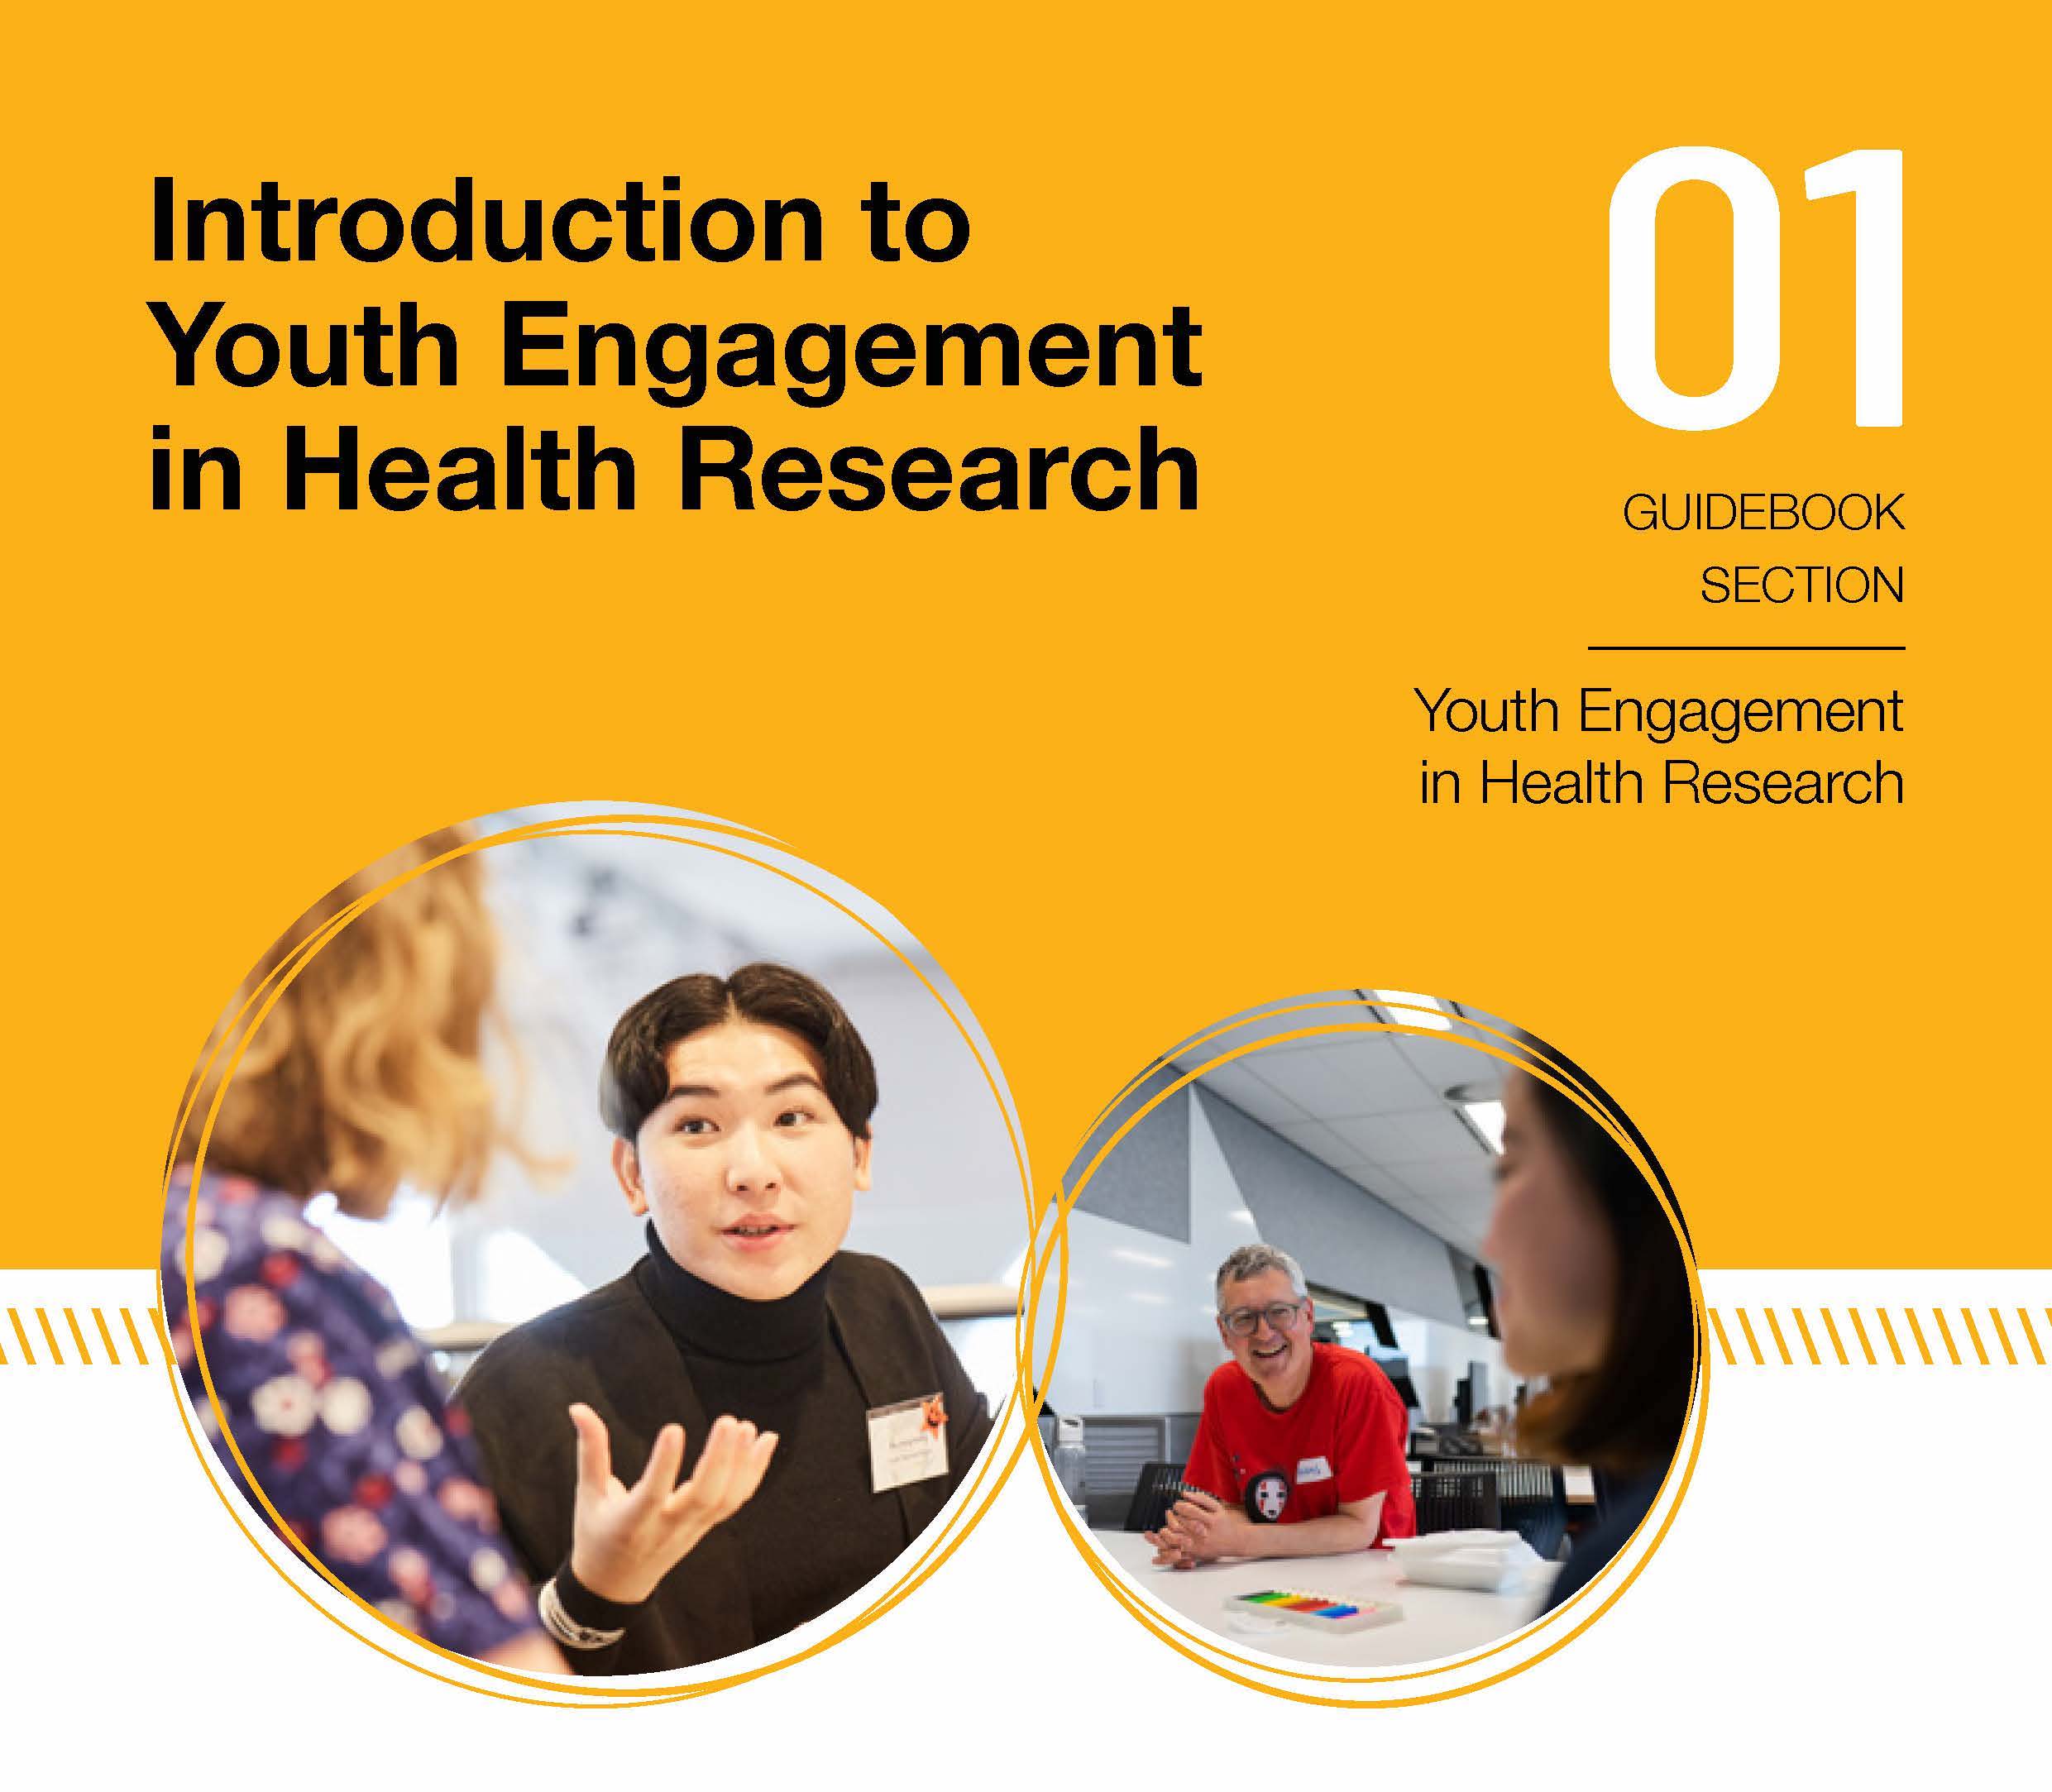 Introduction to Youth Engagement in Health Research